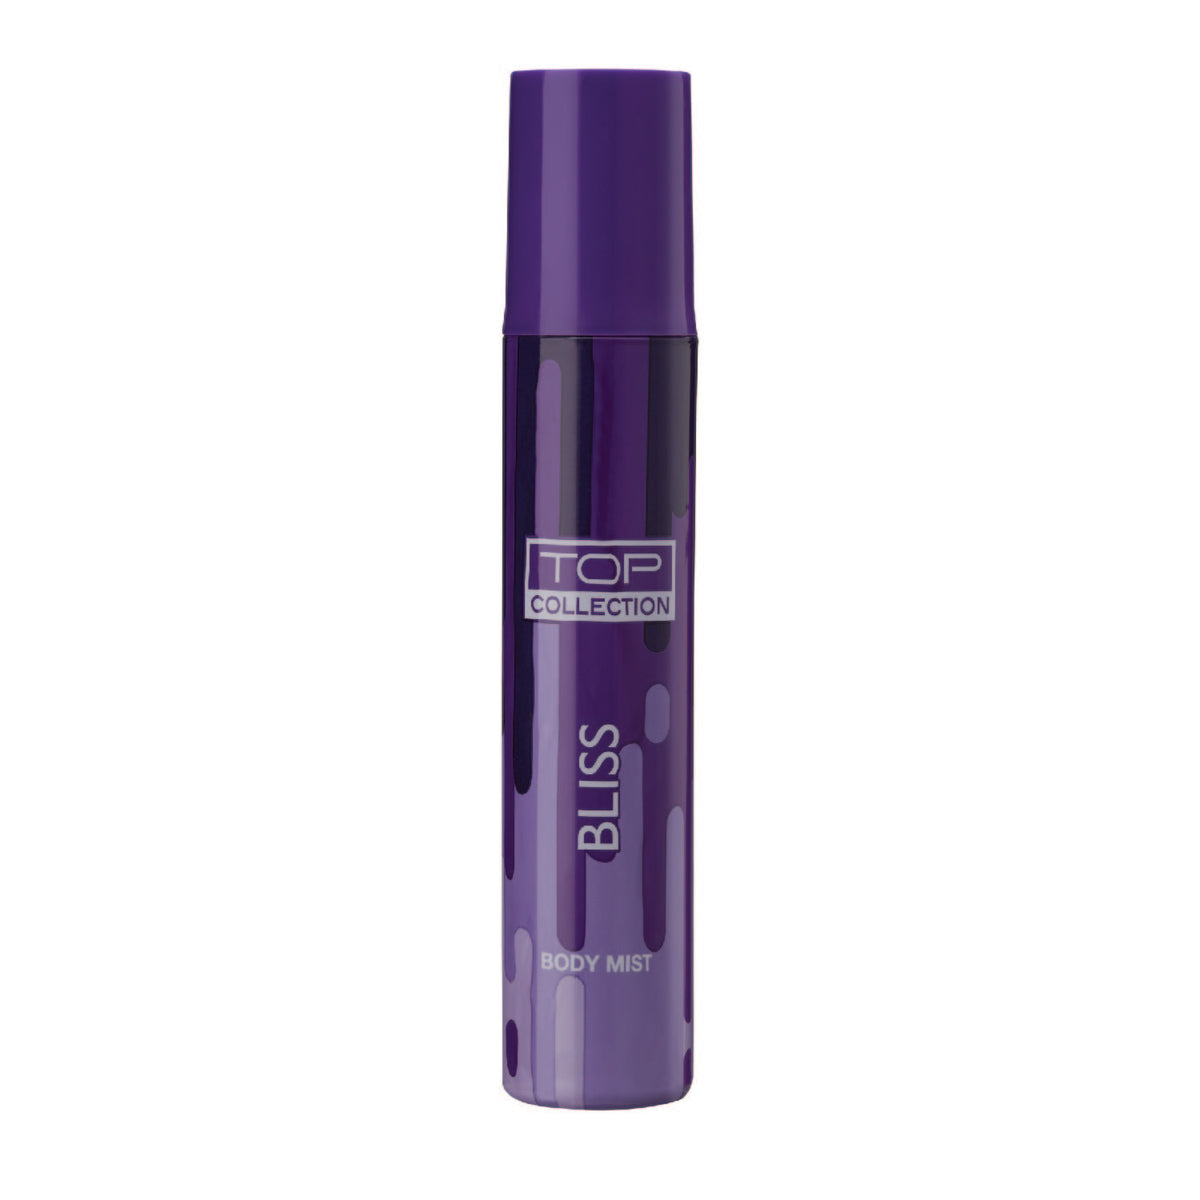 Top Collection Body Mist - Bliss, 75ml Gardenia Cosmotrade LLP